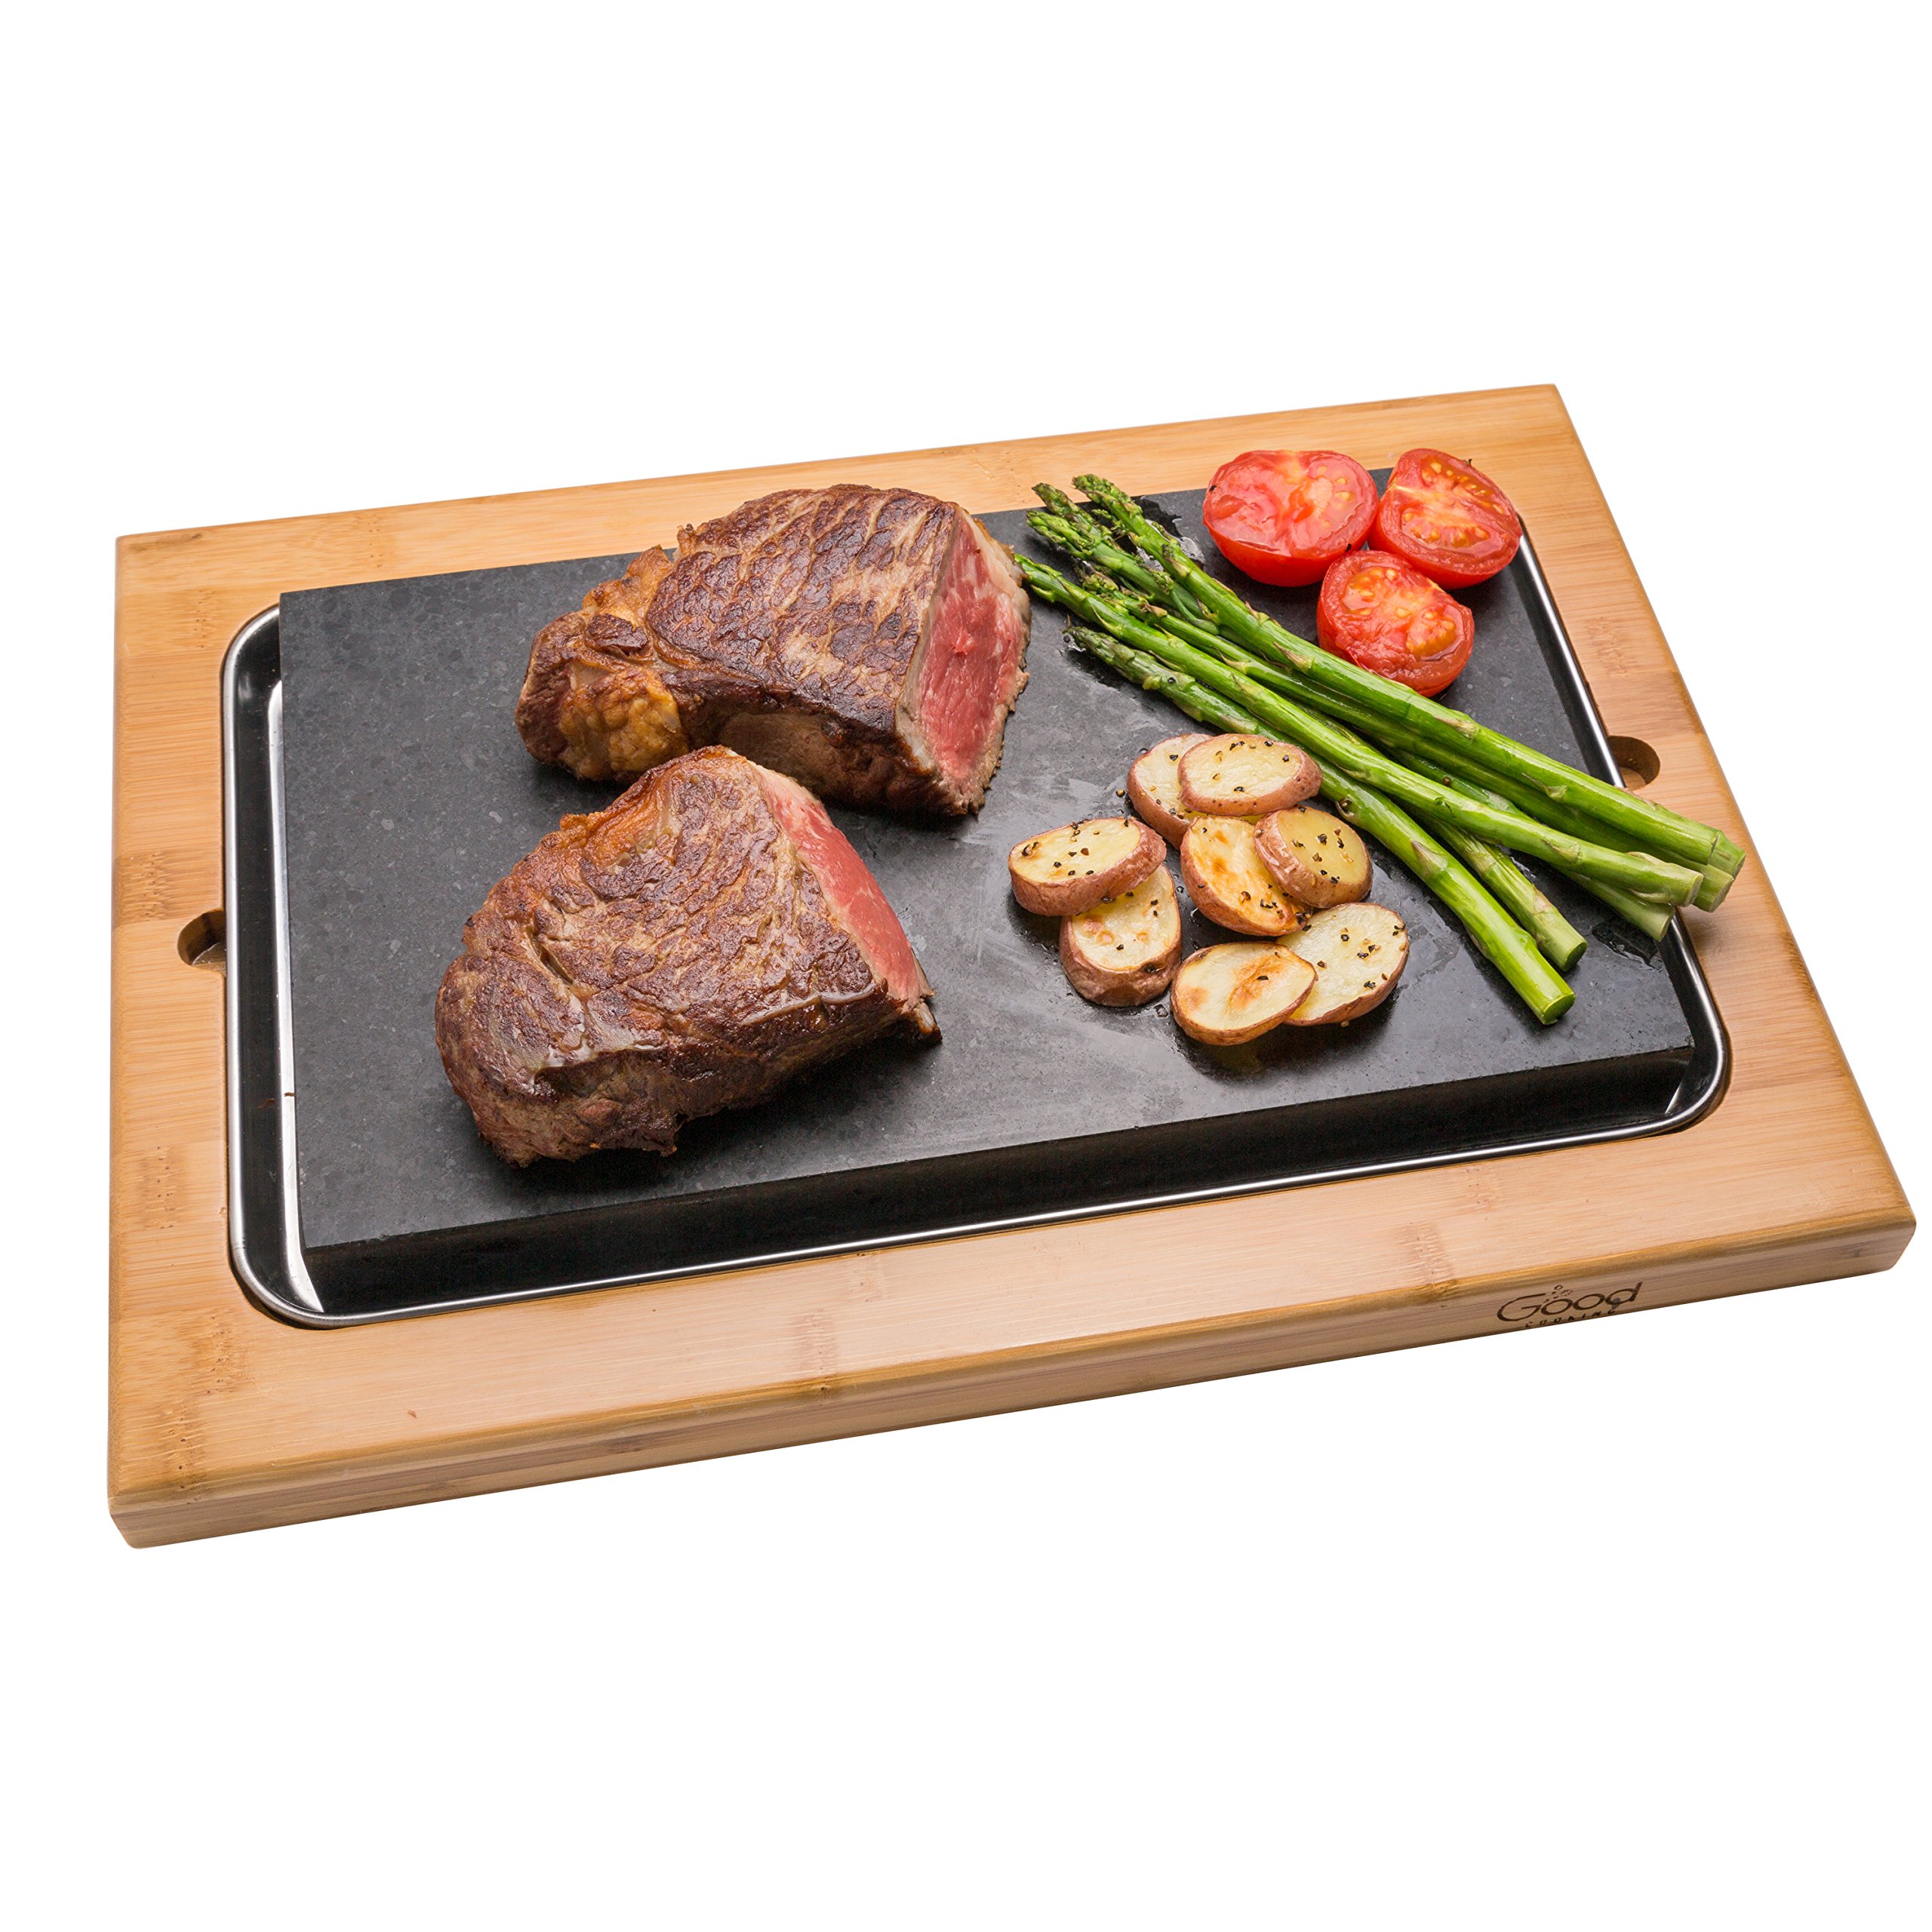 Cooking Stone- Extra Large Lava Hot Stone Tabletop Grill Cooking Platter and Cold Lava Rock Indoor BBQ Hibachi Grilling Stone (12.5